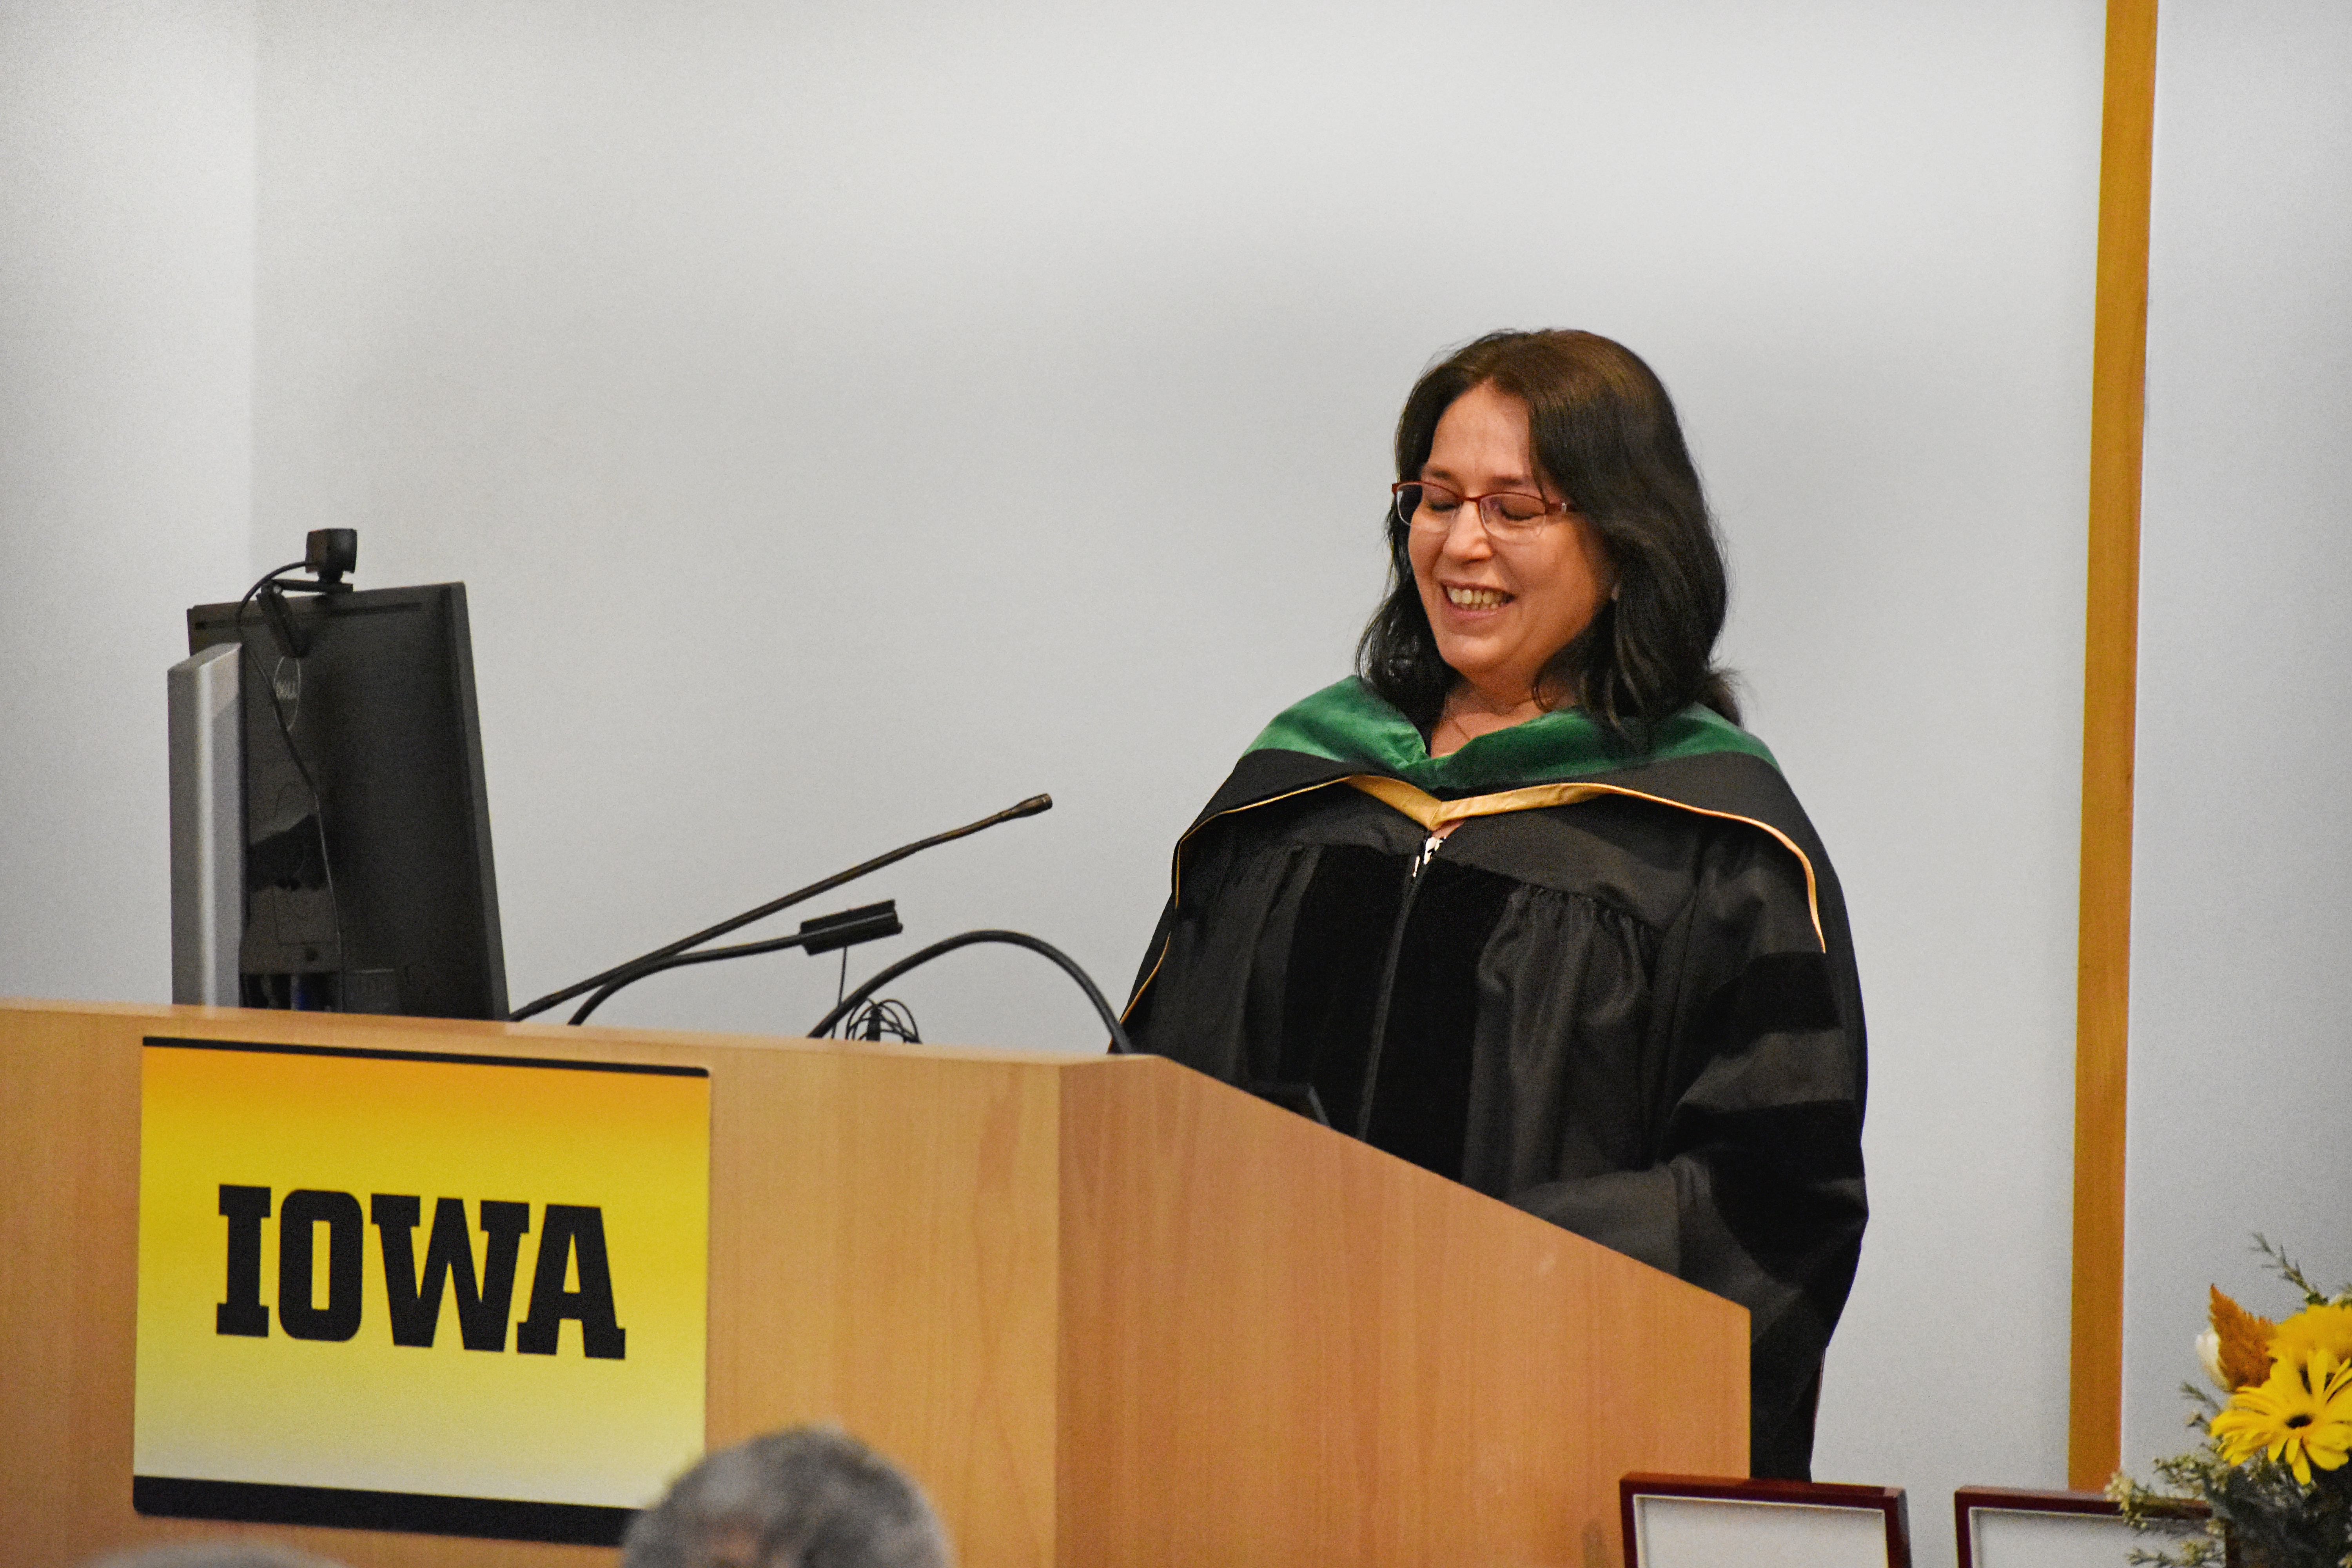 Alina Dumitrescu, MD recognized as the recipient of the Chakraborty Family Professorship in Pediatric Genetic Retinal Diseases at the 2023 Fall CCOM Investiture Ceremony